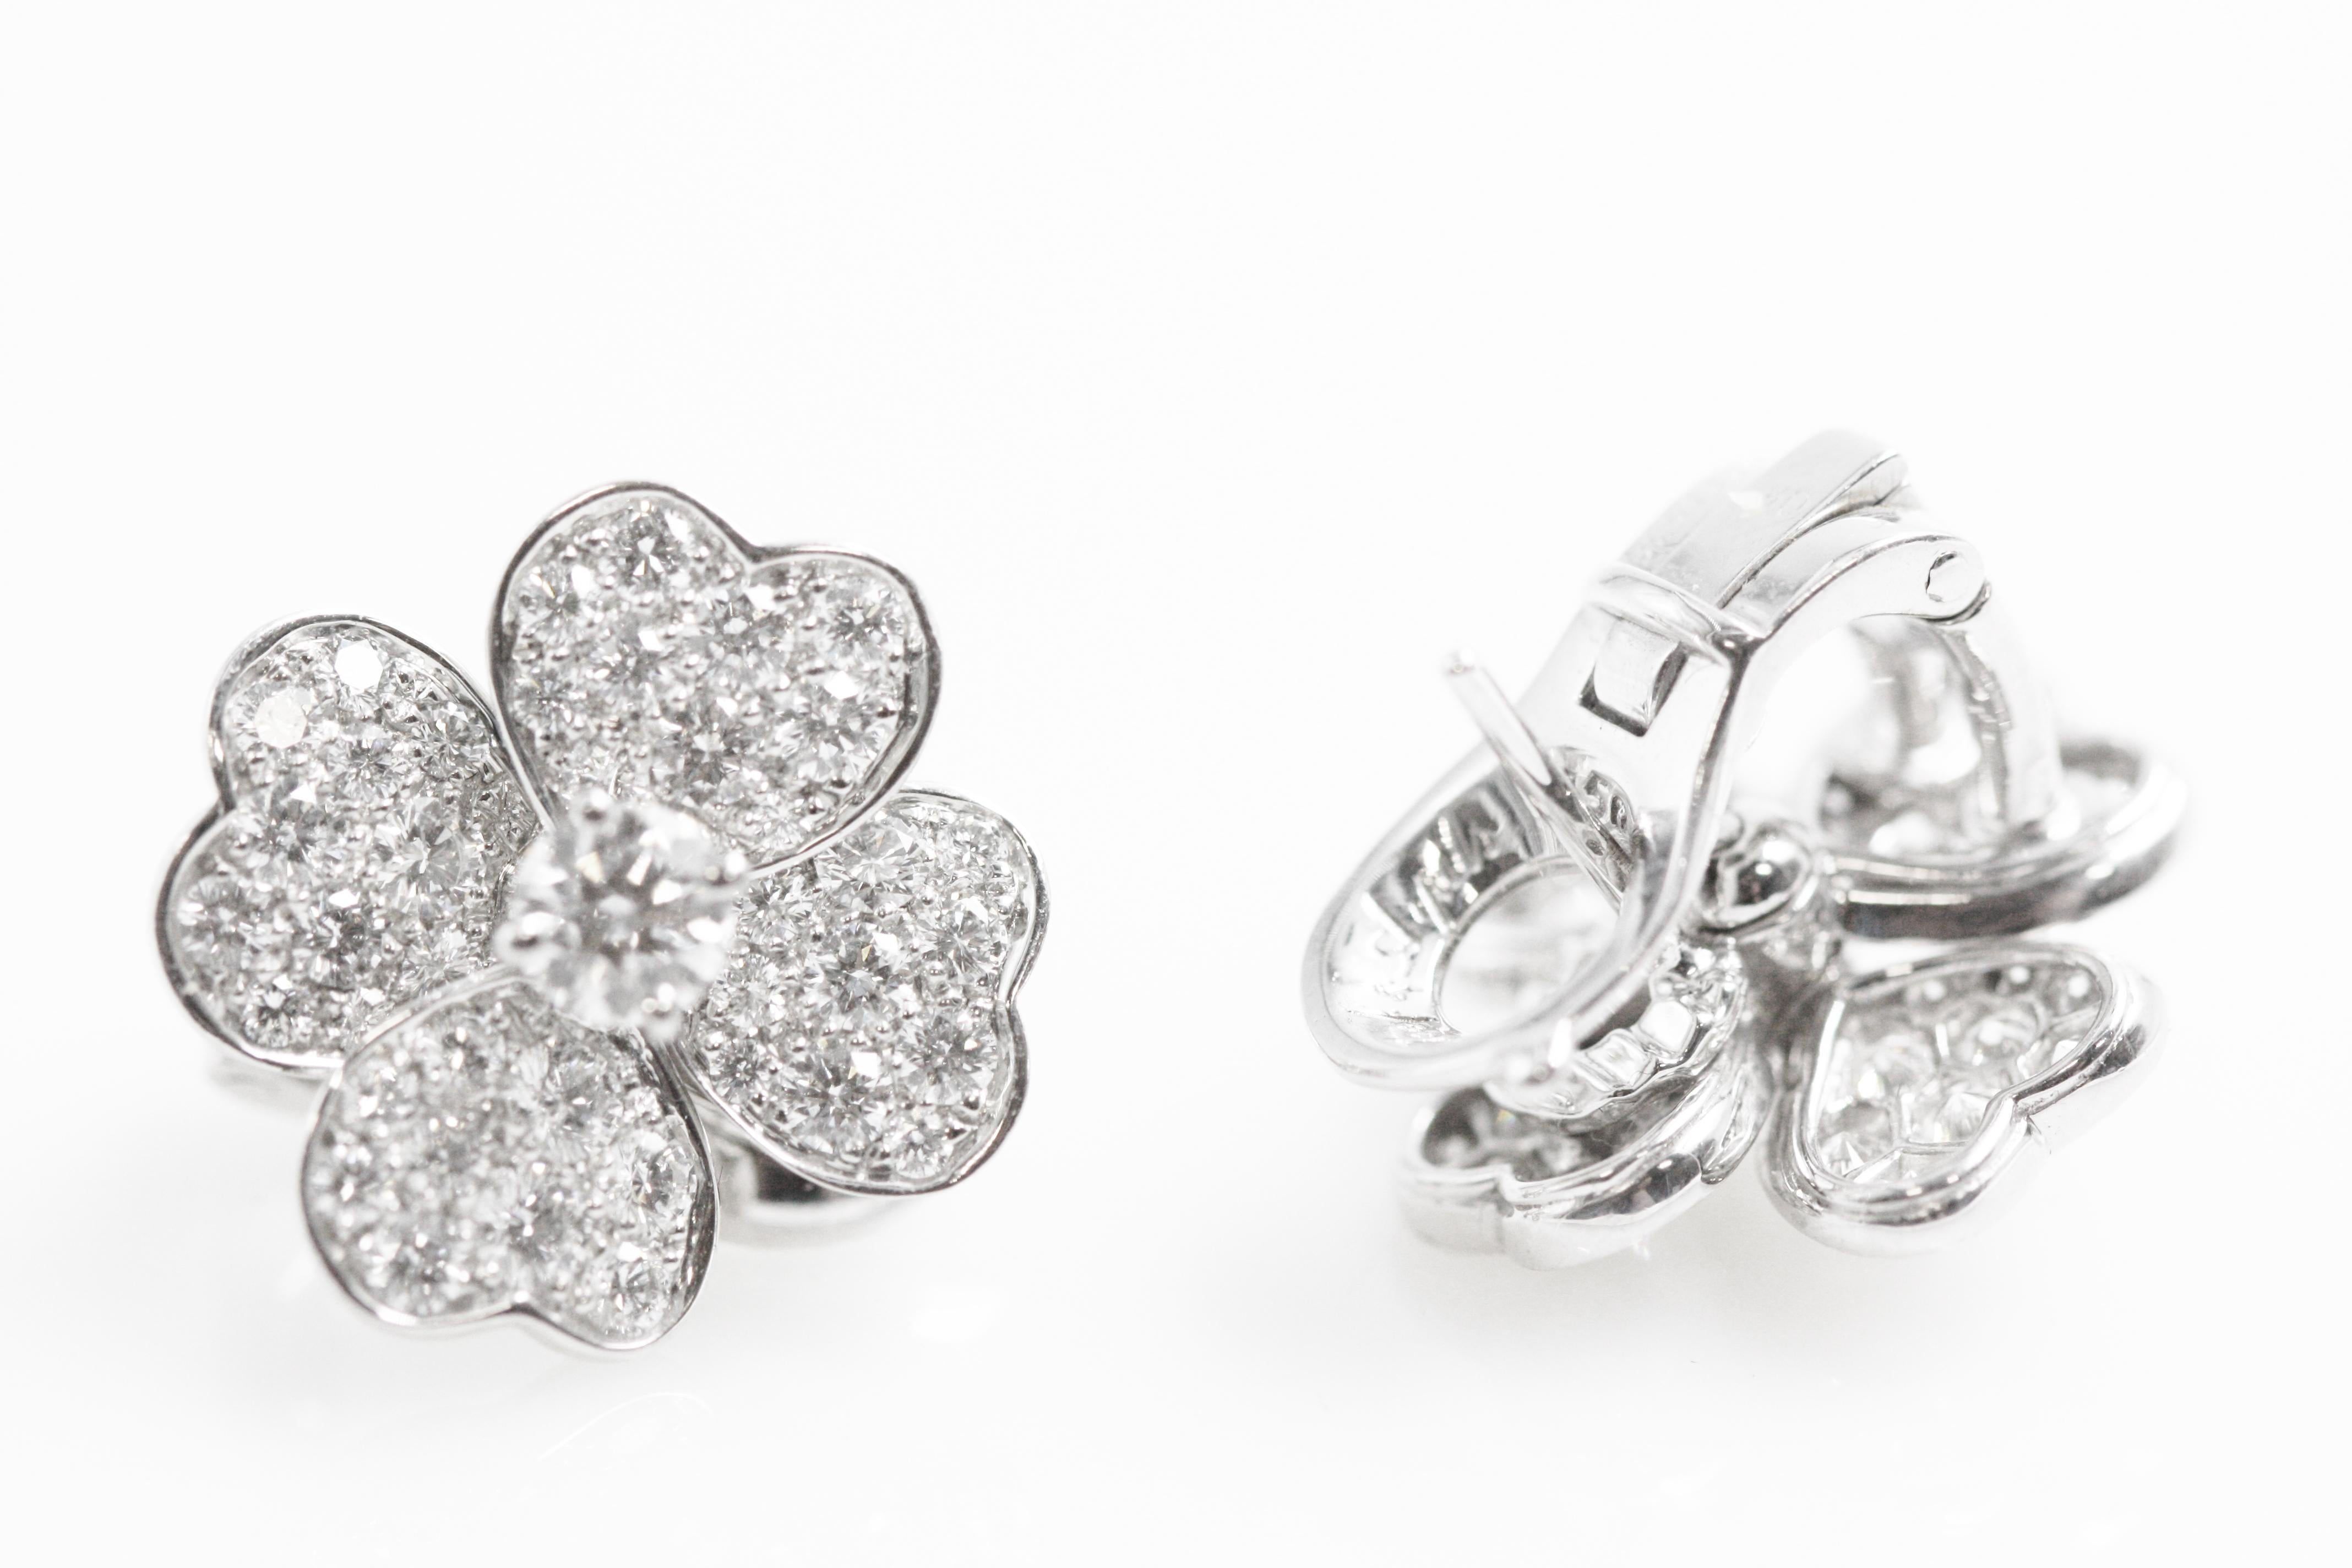 Composed of four heart-shaped petals, Cosmos(TM) is inspired by one of Van Cleef & Arpels' signature flowers, dating from the 1950s. The naturalistic design creates a strong sense of movement.

Cosmos earrings, small model, 18K white gold, round